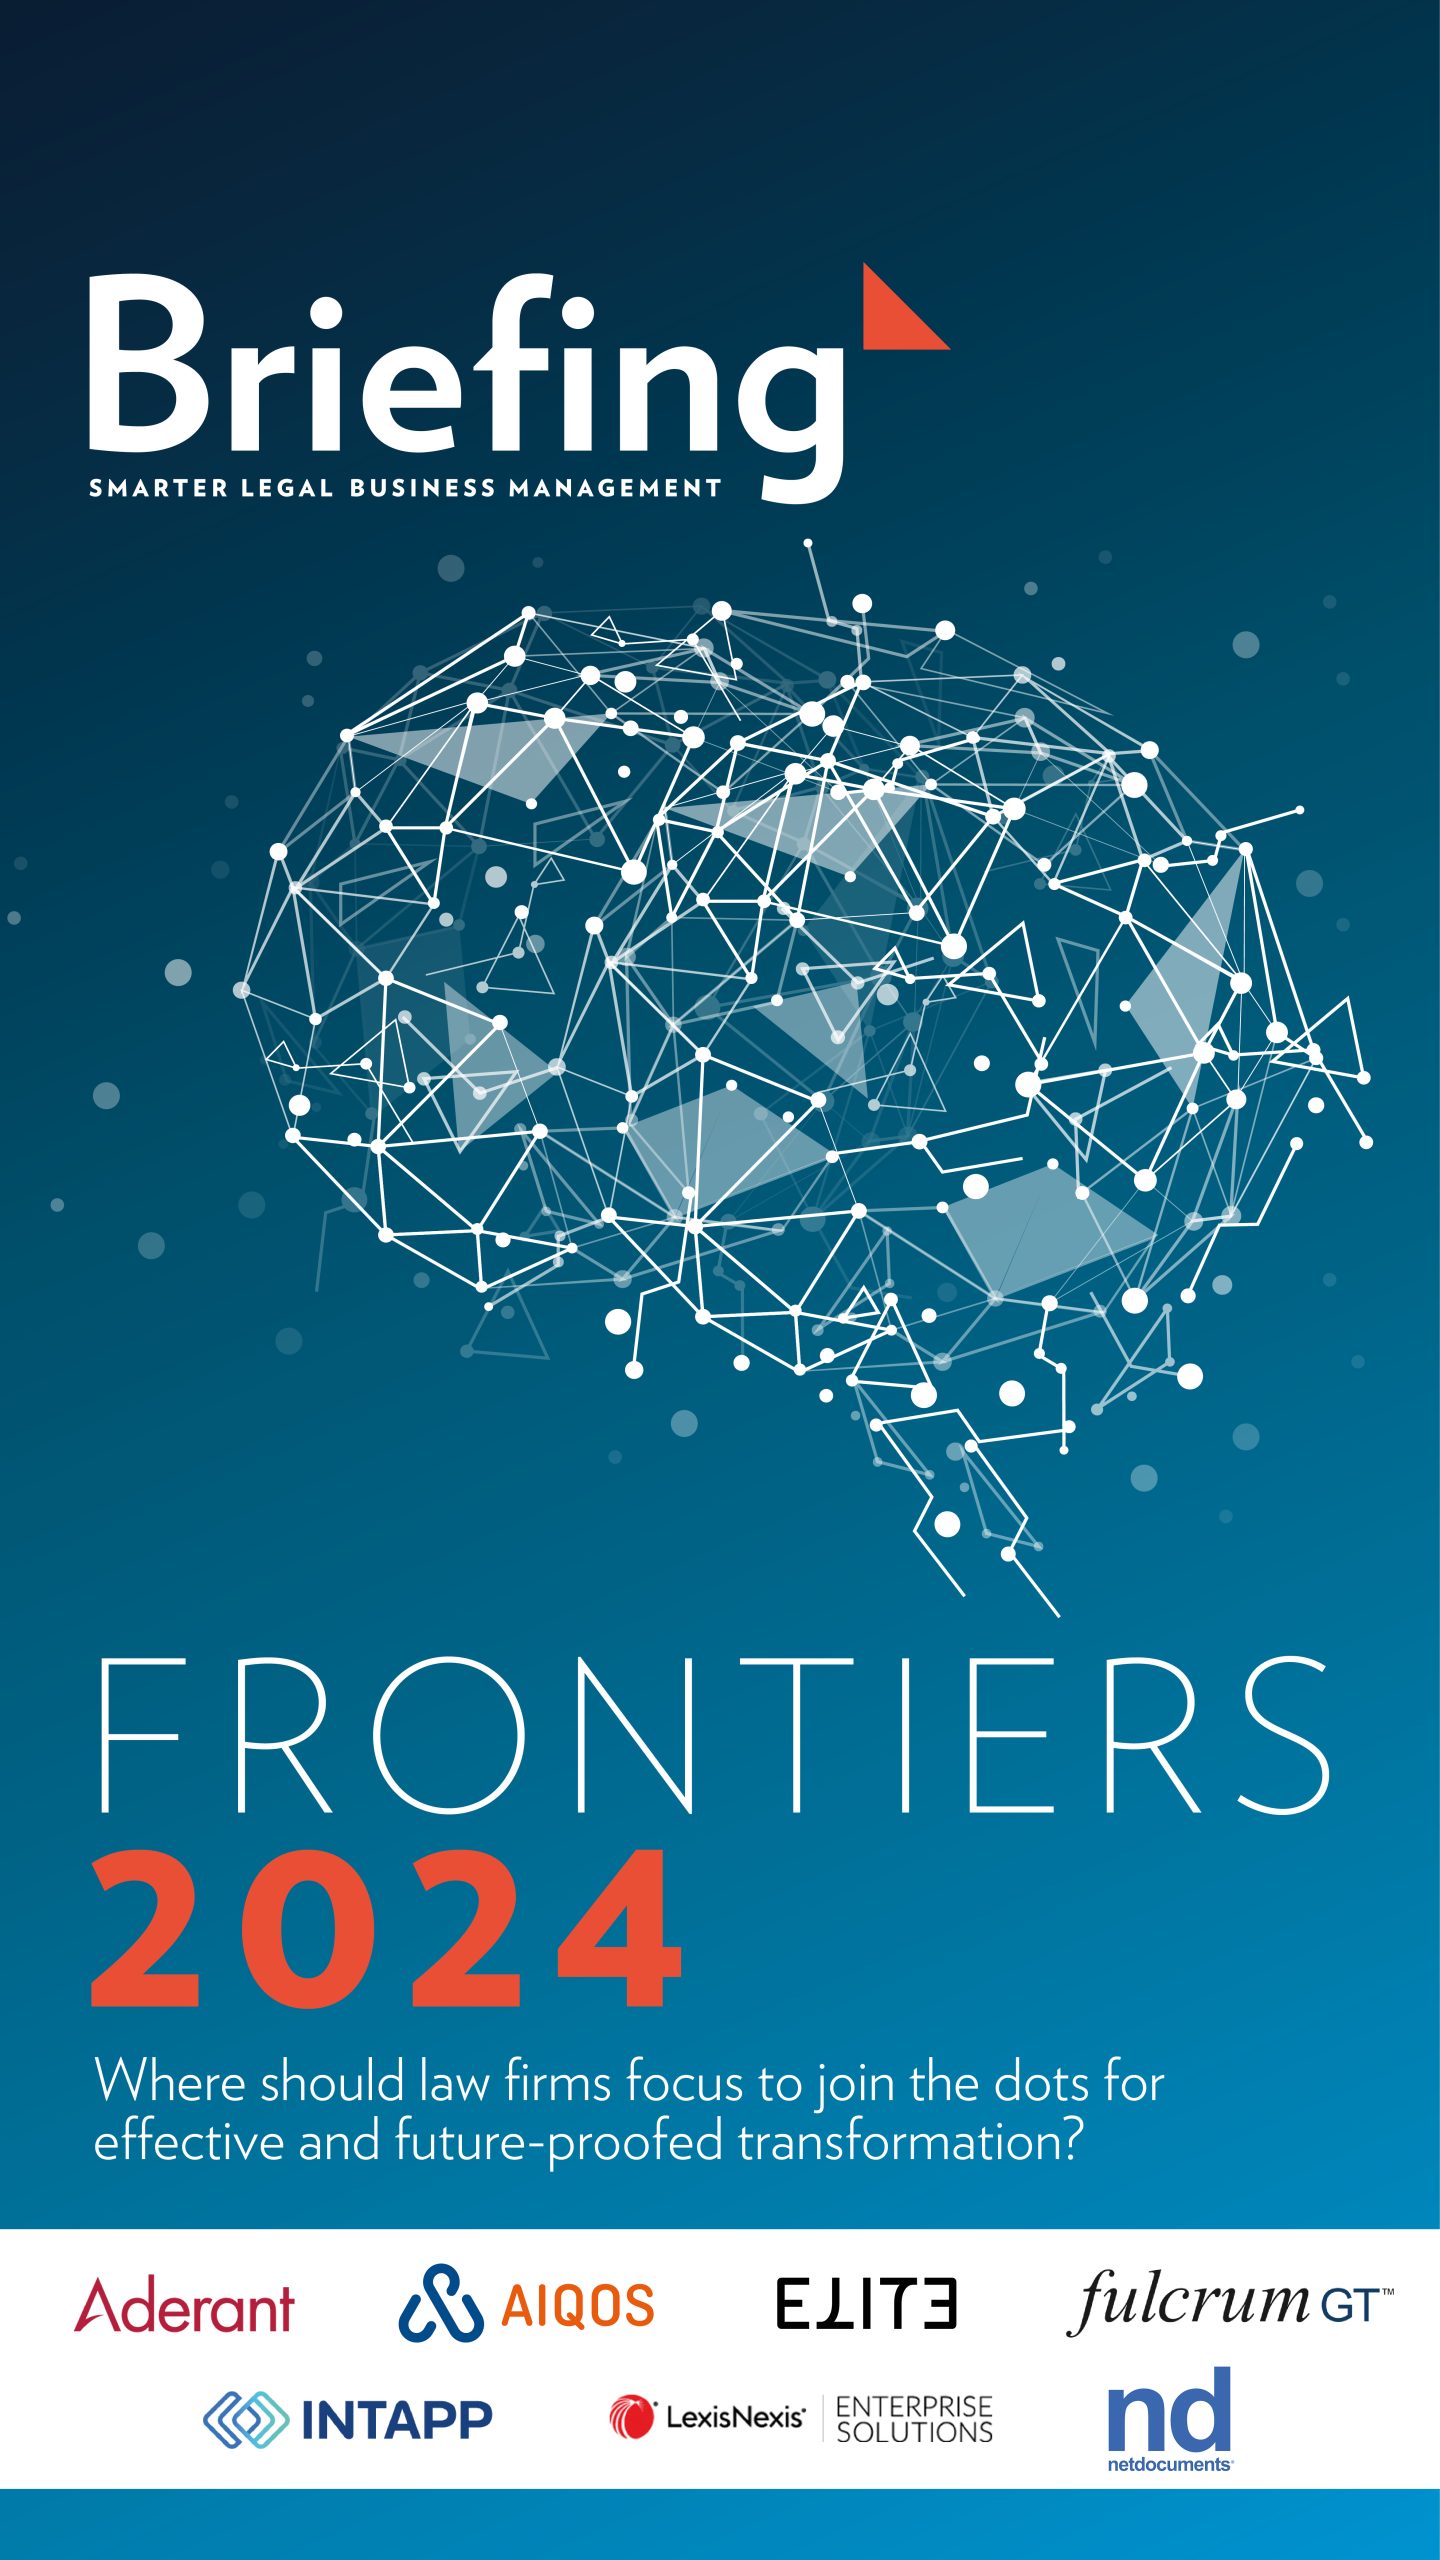 Briefing Frontiers 2024